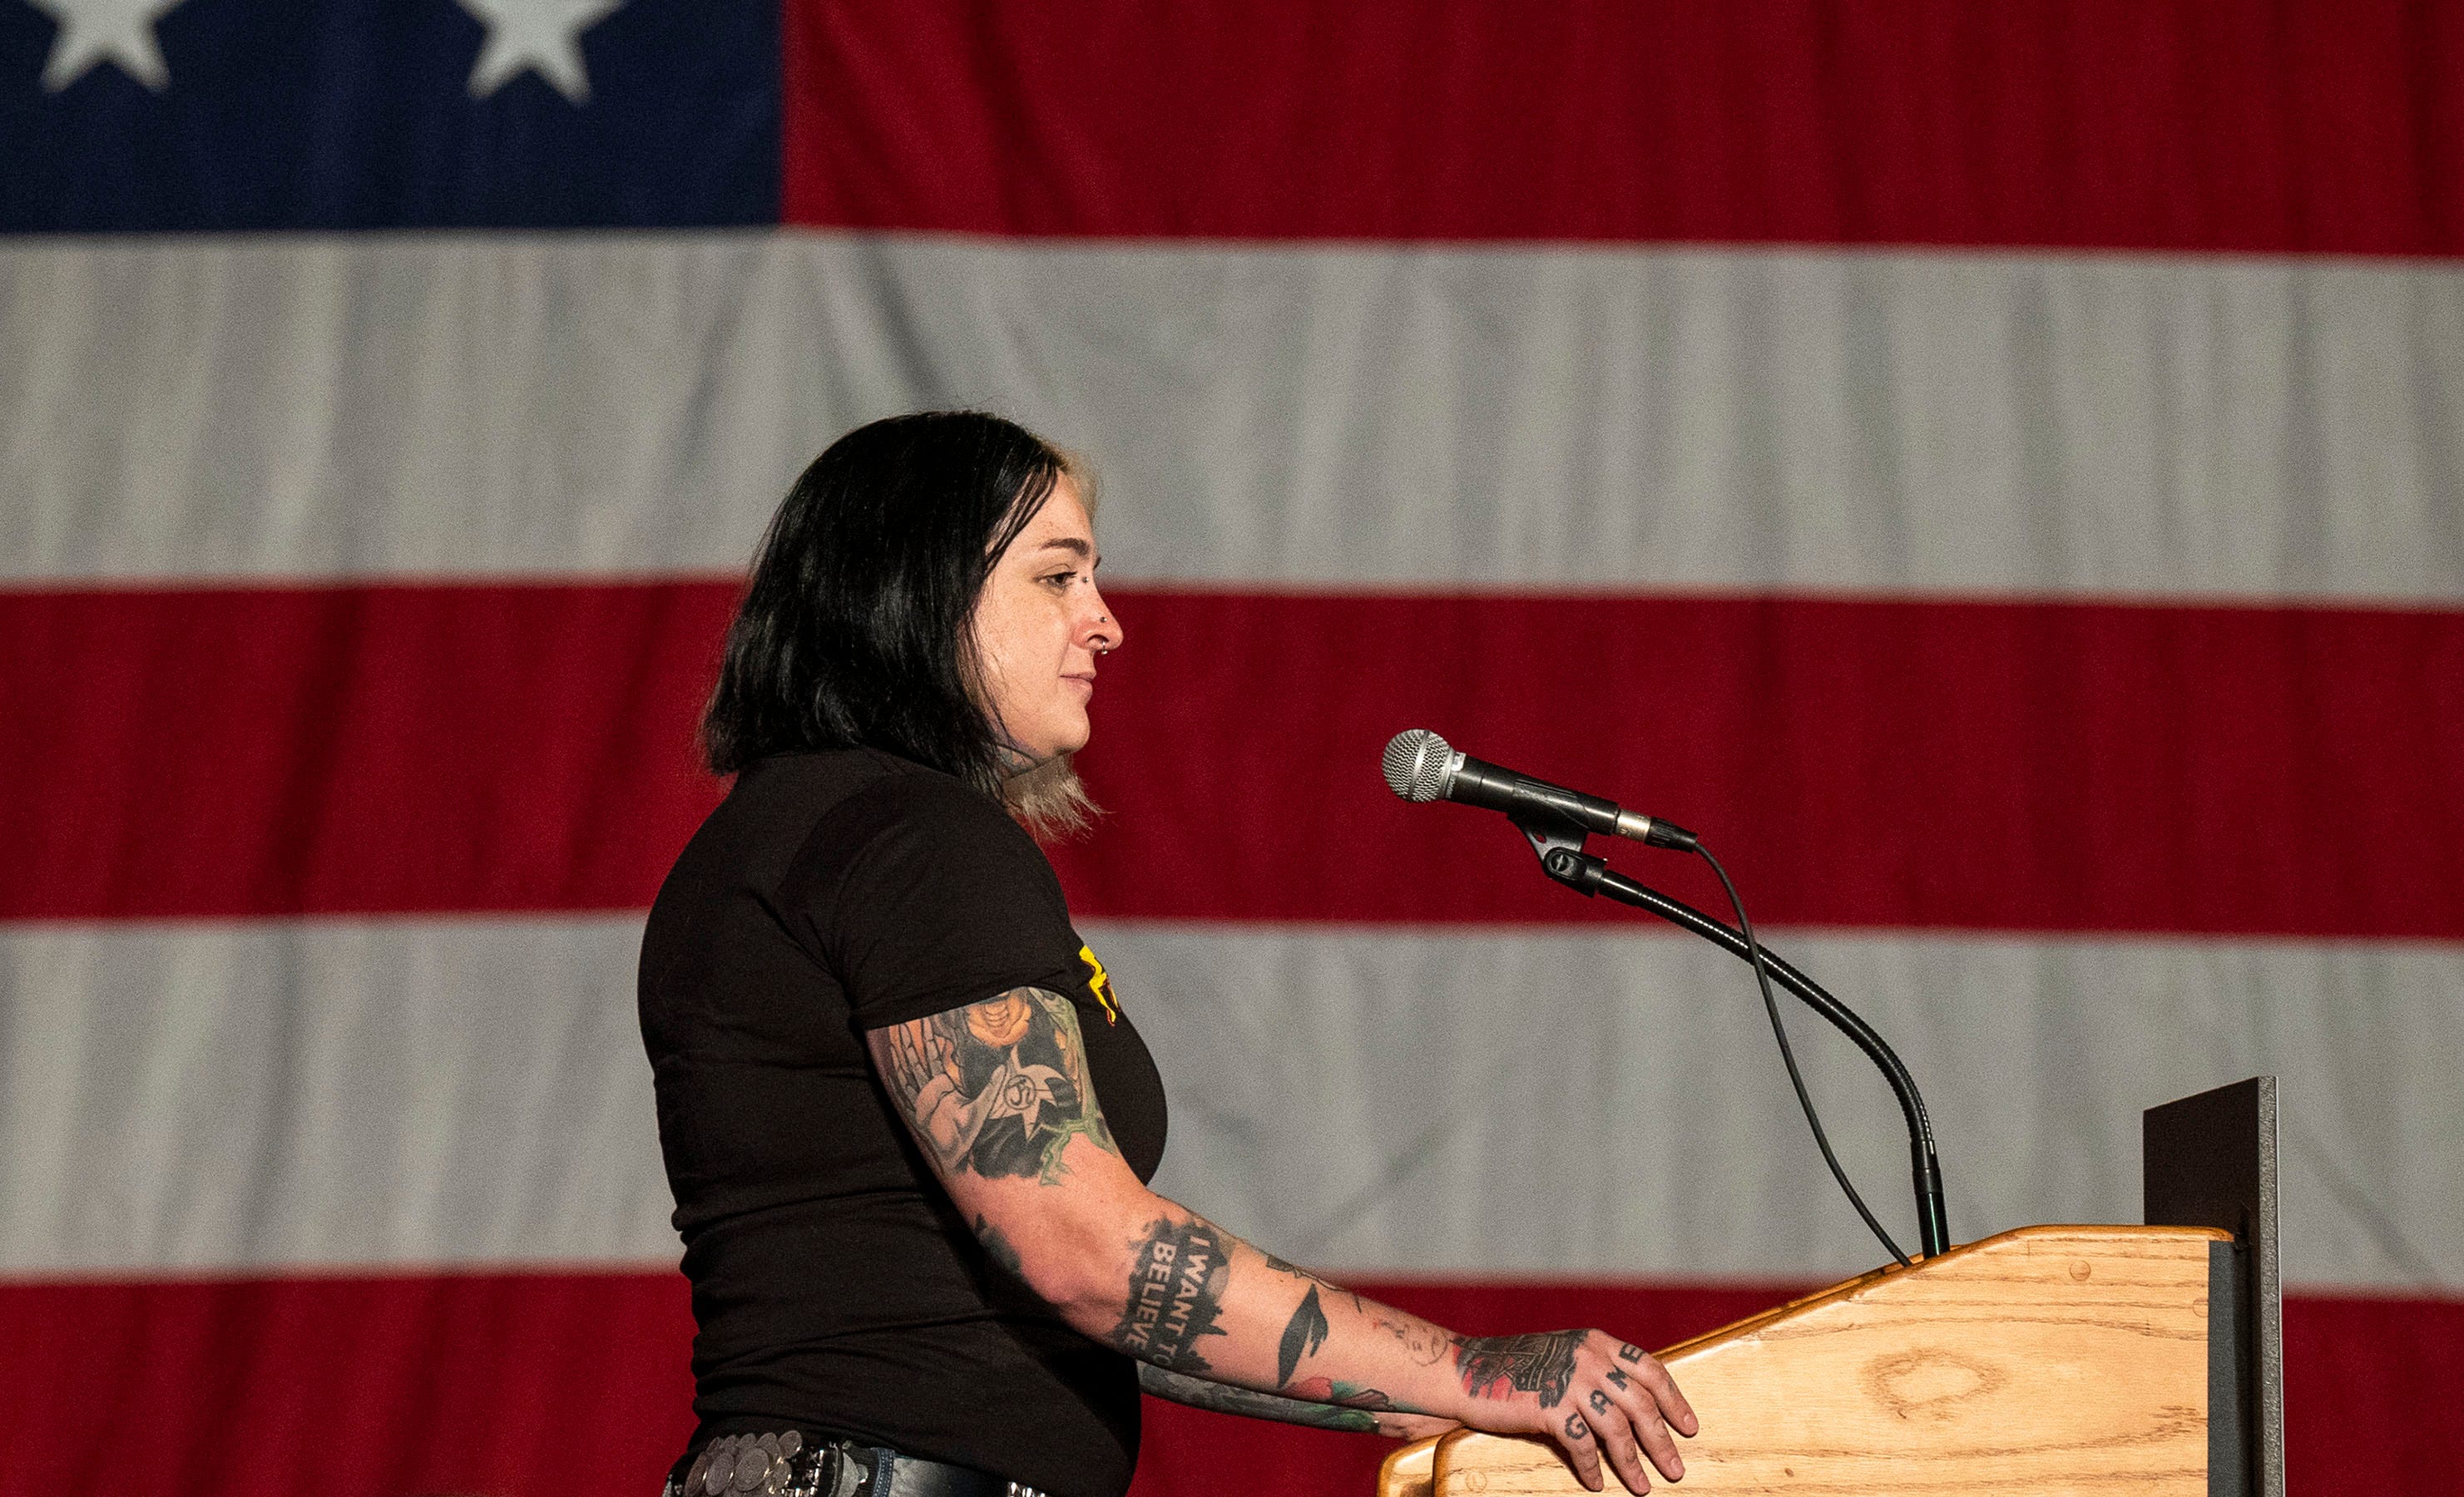 Amelia McMillan, a Central York School District parent, speaking at the rally for John Fetterman in York on Saturday, Oct. 8, 2022.